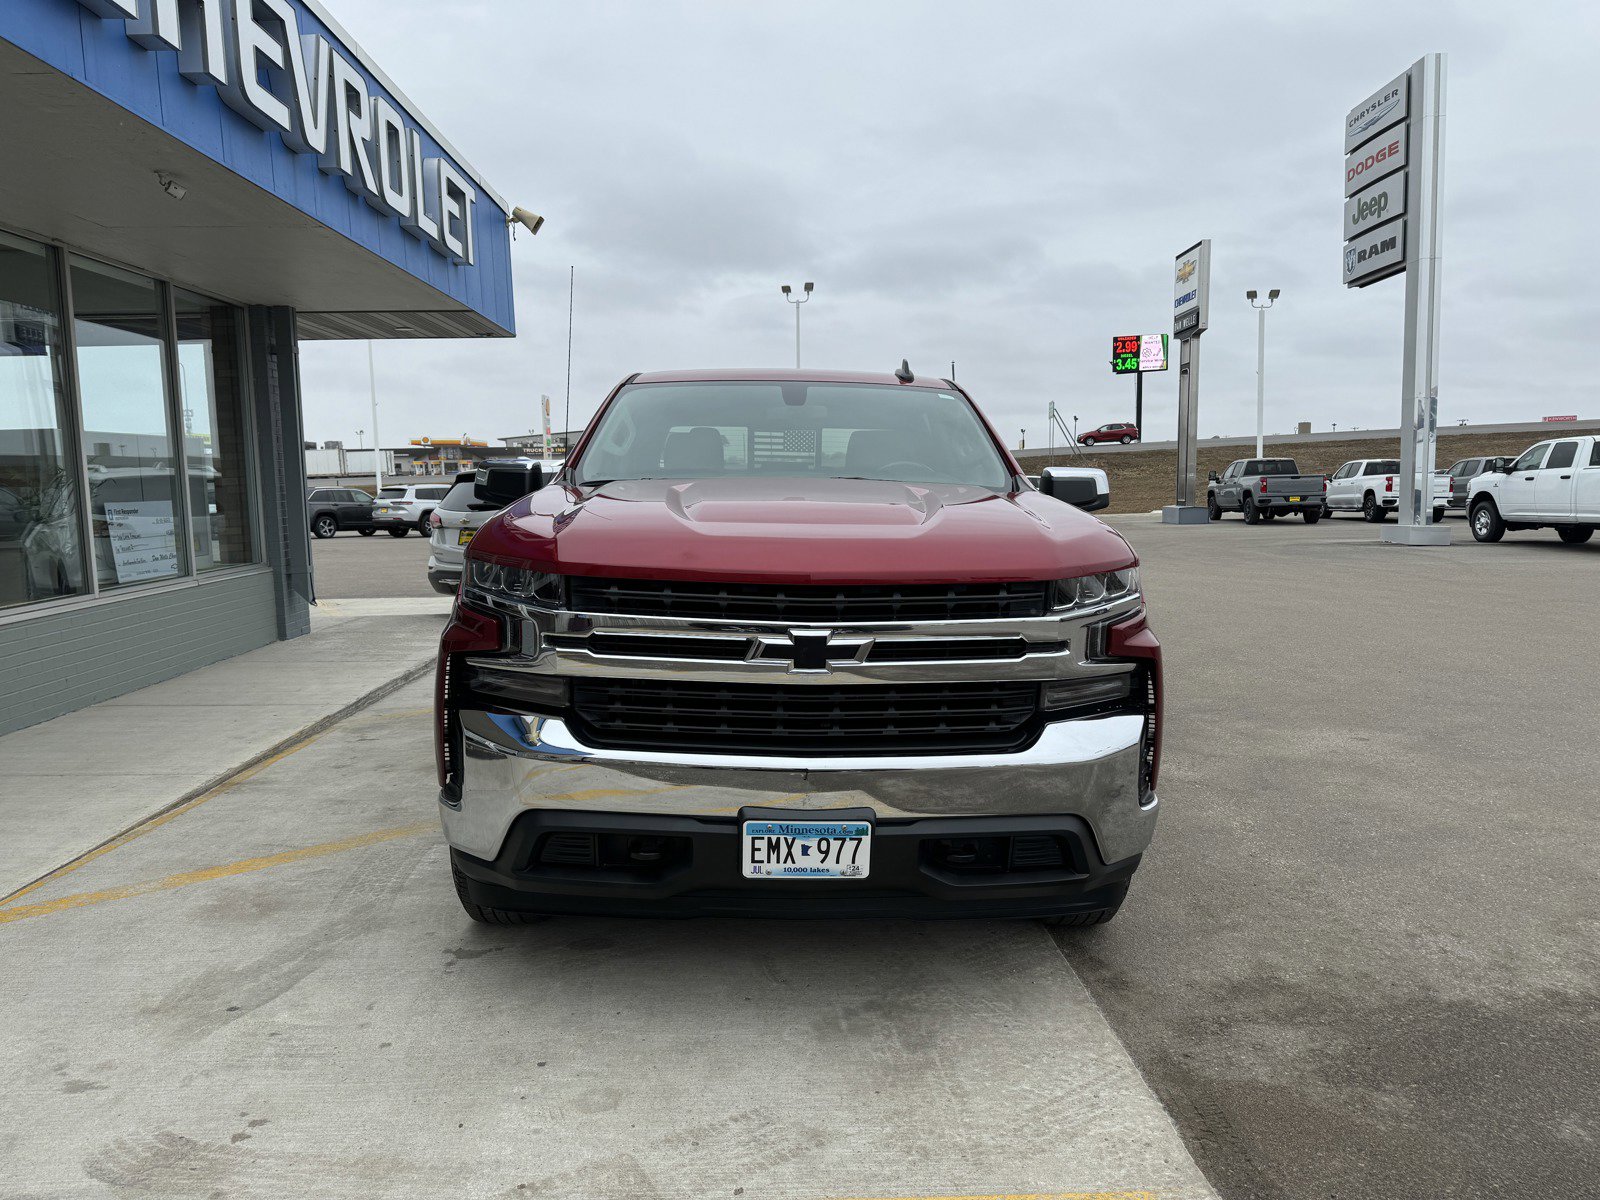 Used 2020 Chevrolet Silverado 1500 LT with VIN 1GCUYDED6LZ311428 for sale in Sauk Centre, Minnesota